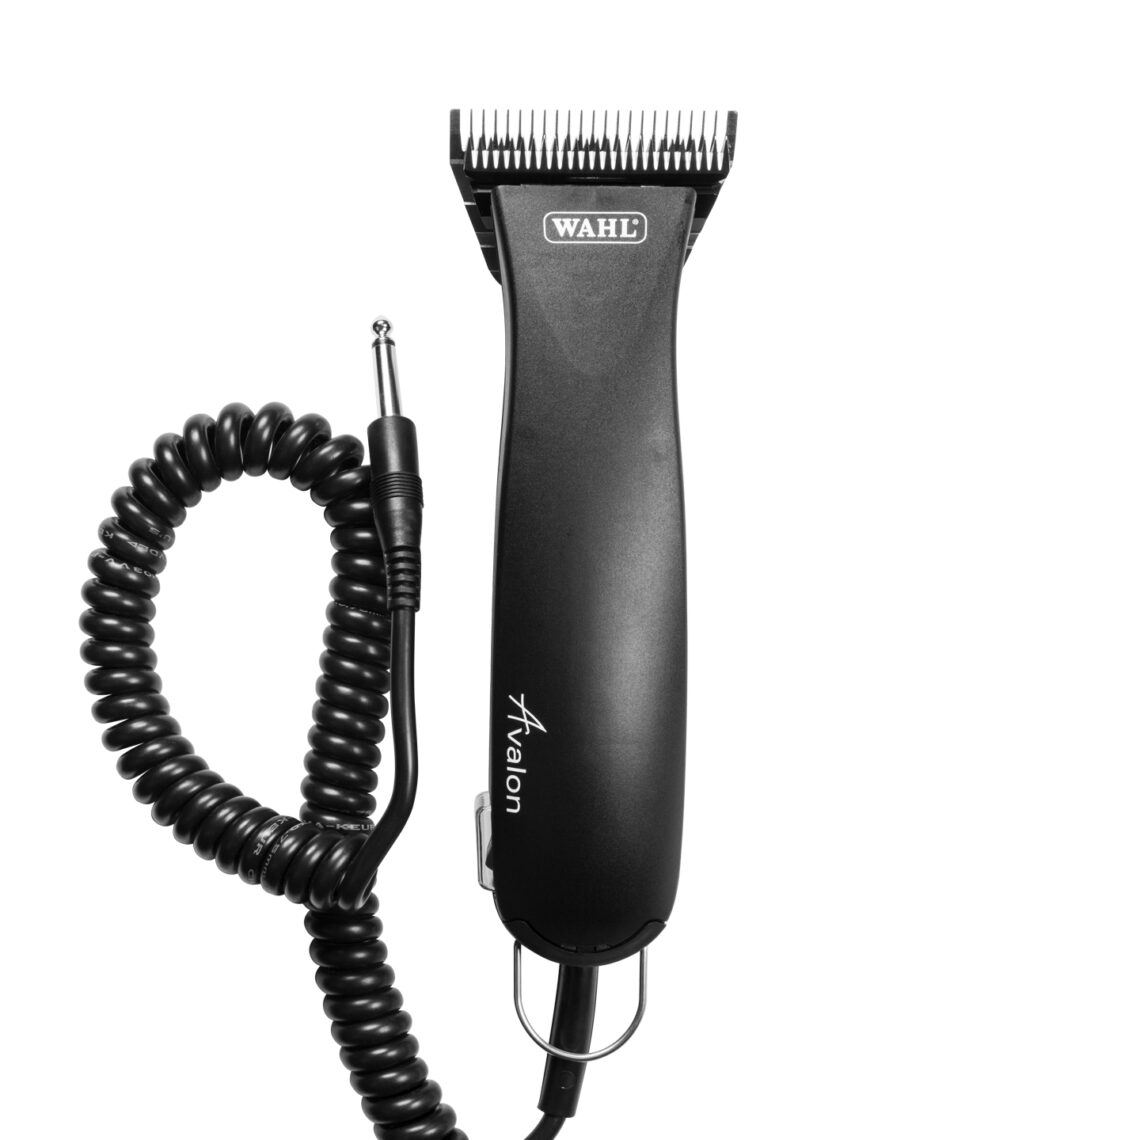 Avalon Battery Operated Horse Clipper (WM6290-800) Image